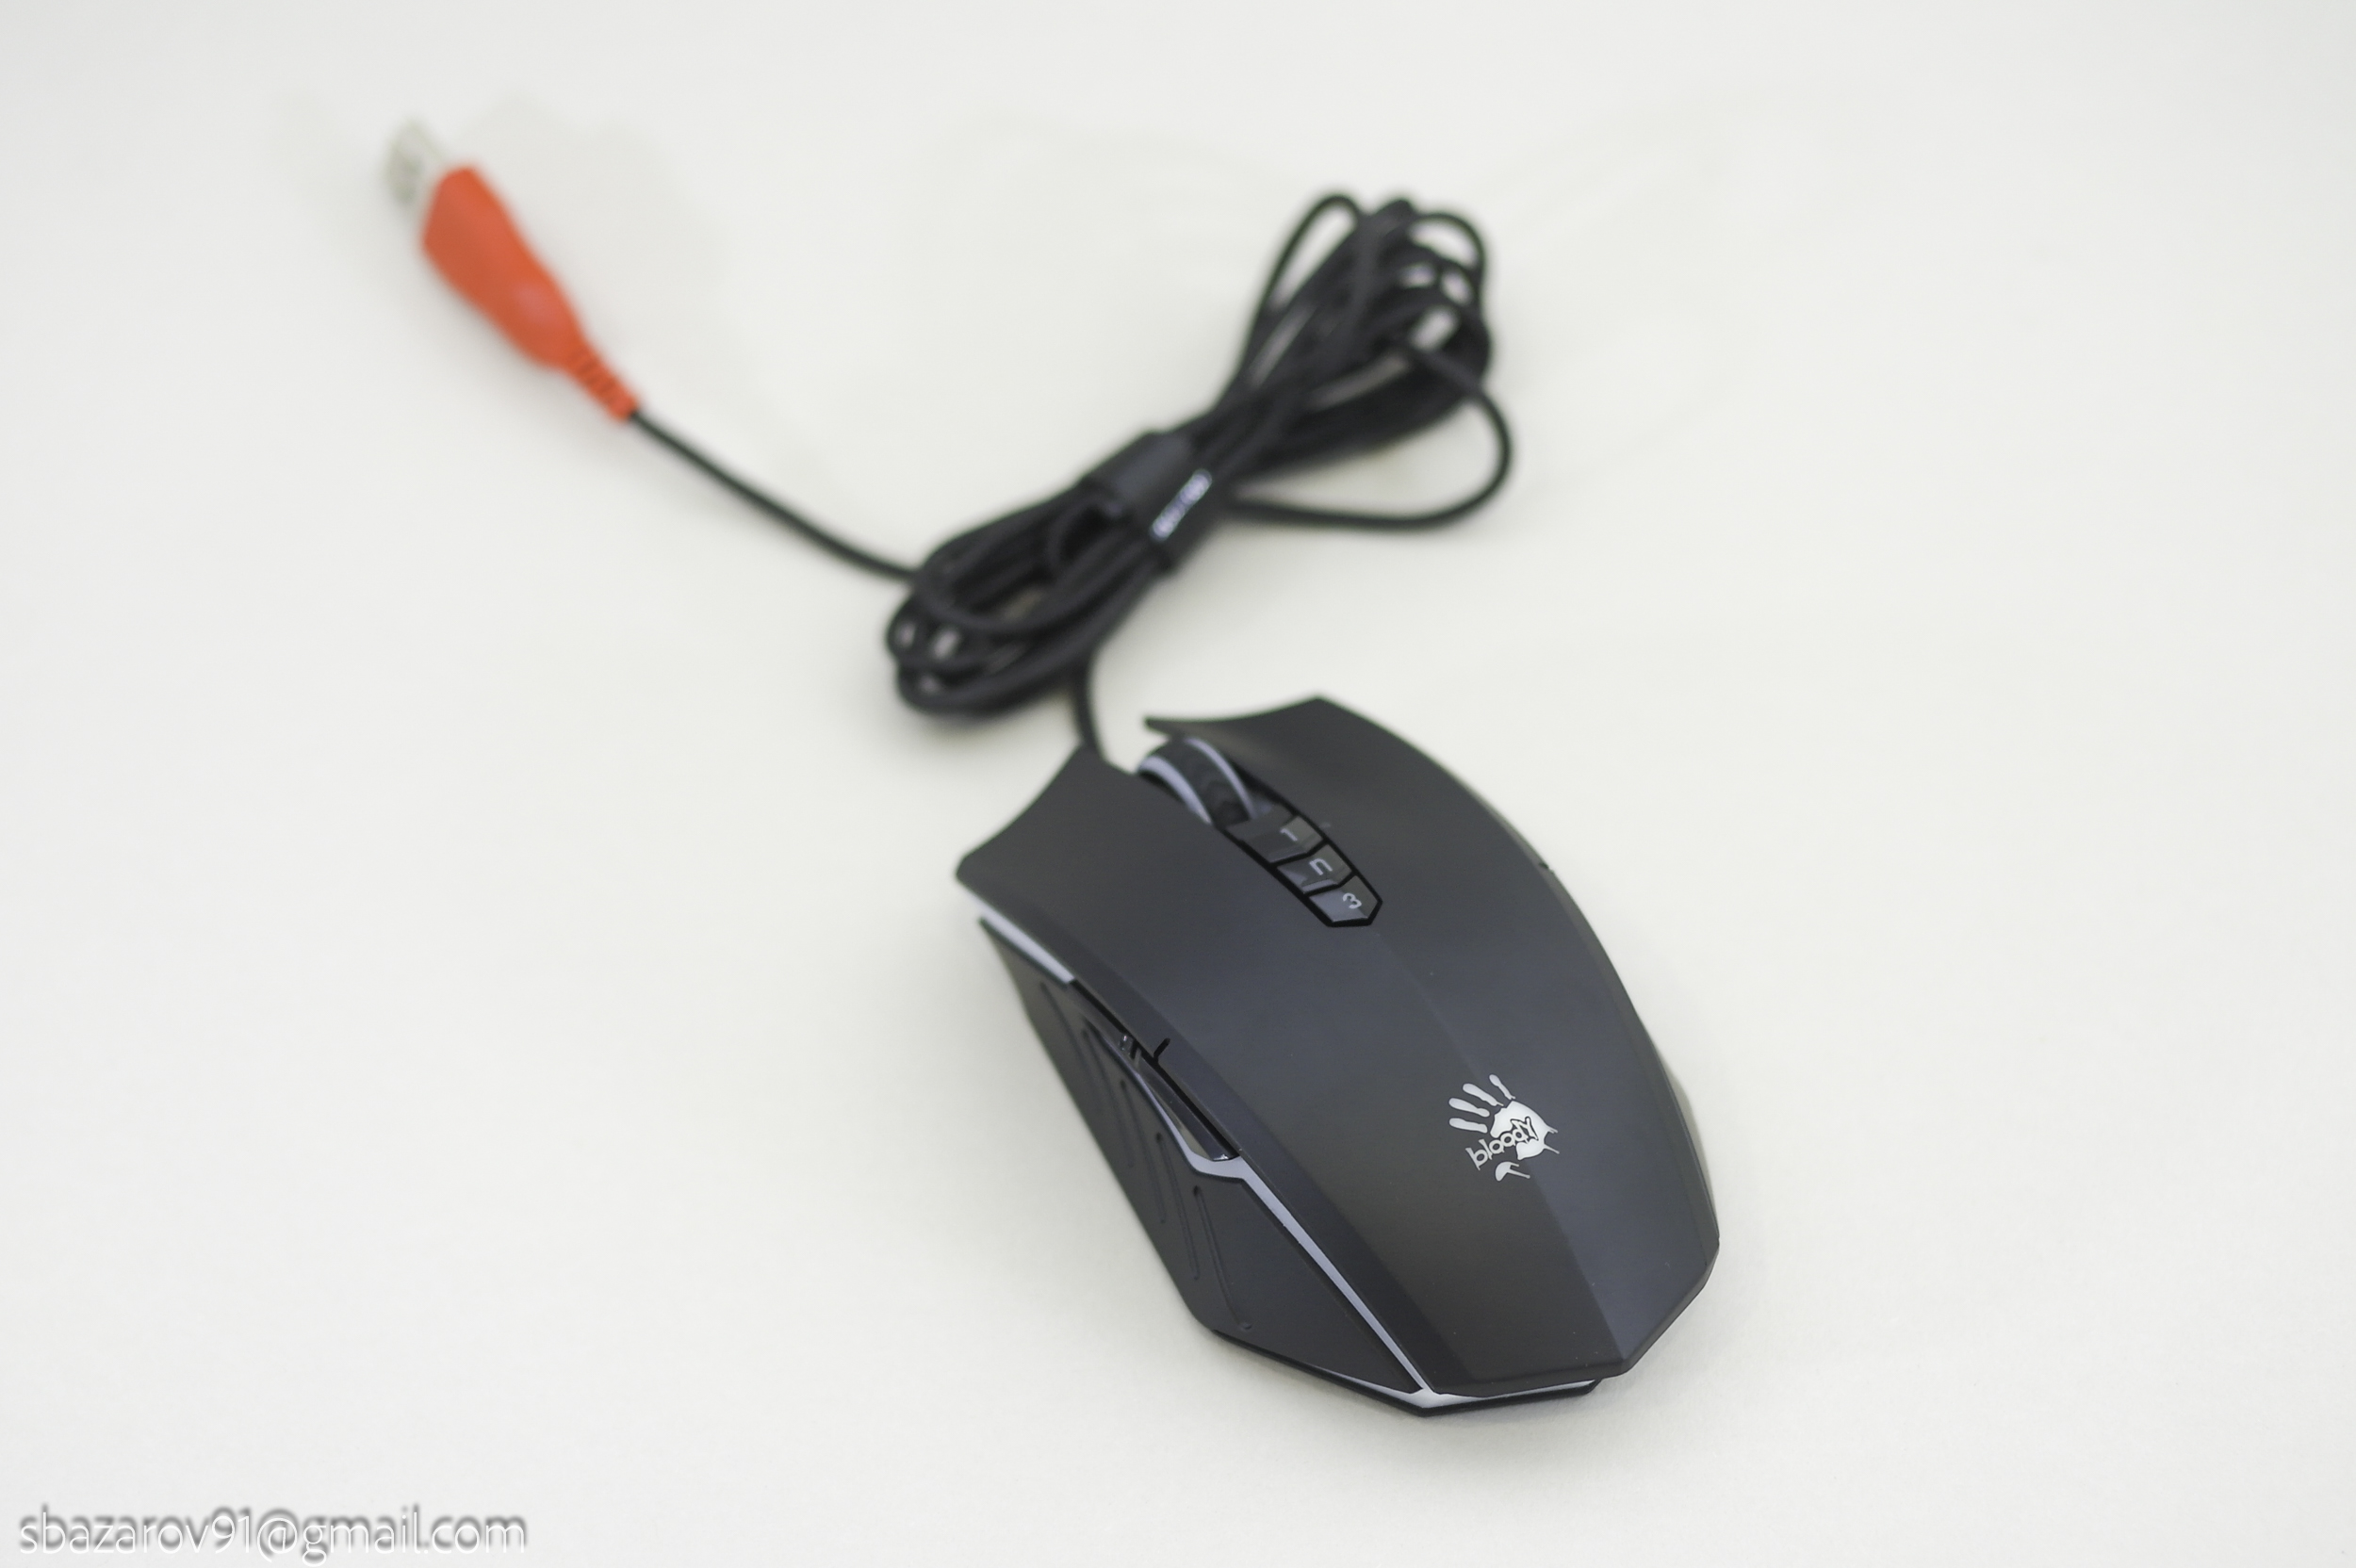 Bloody mouse a4tech rust обход фото 79